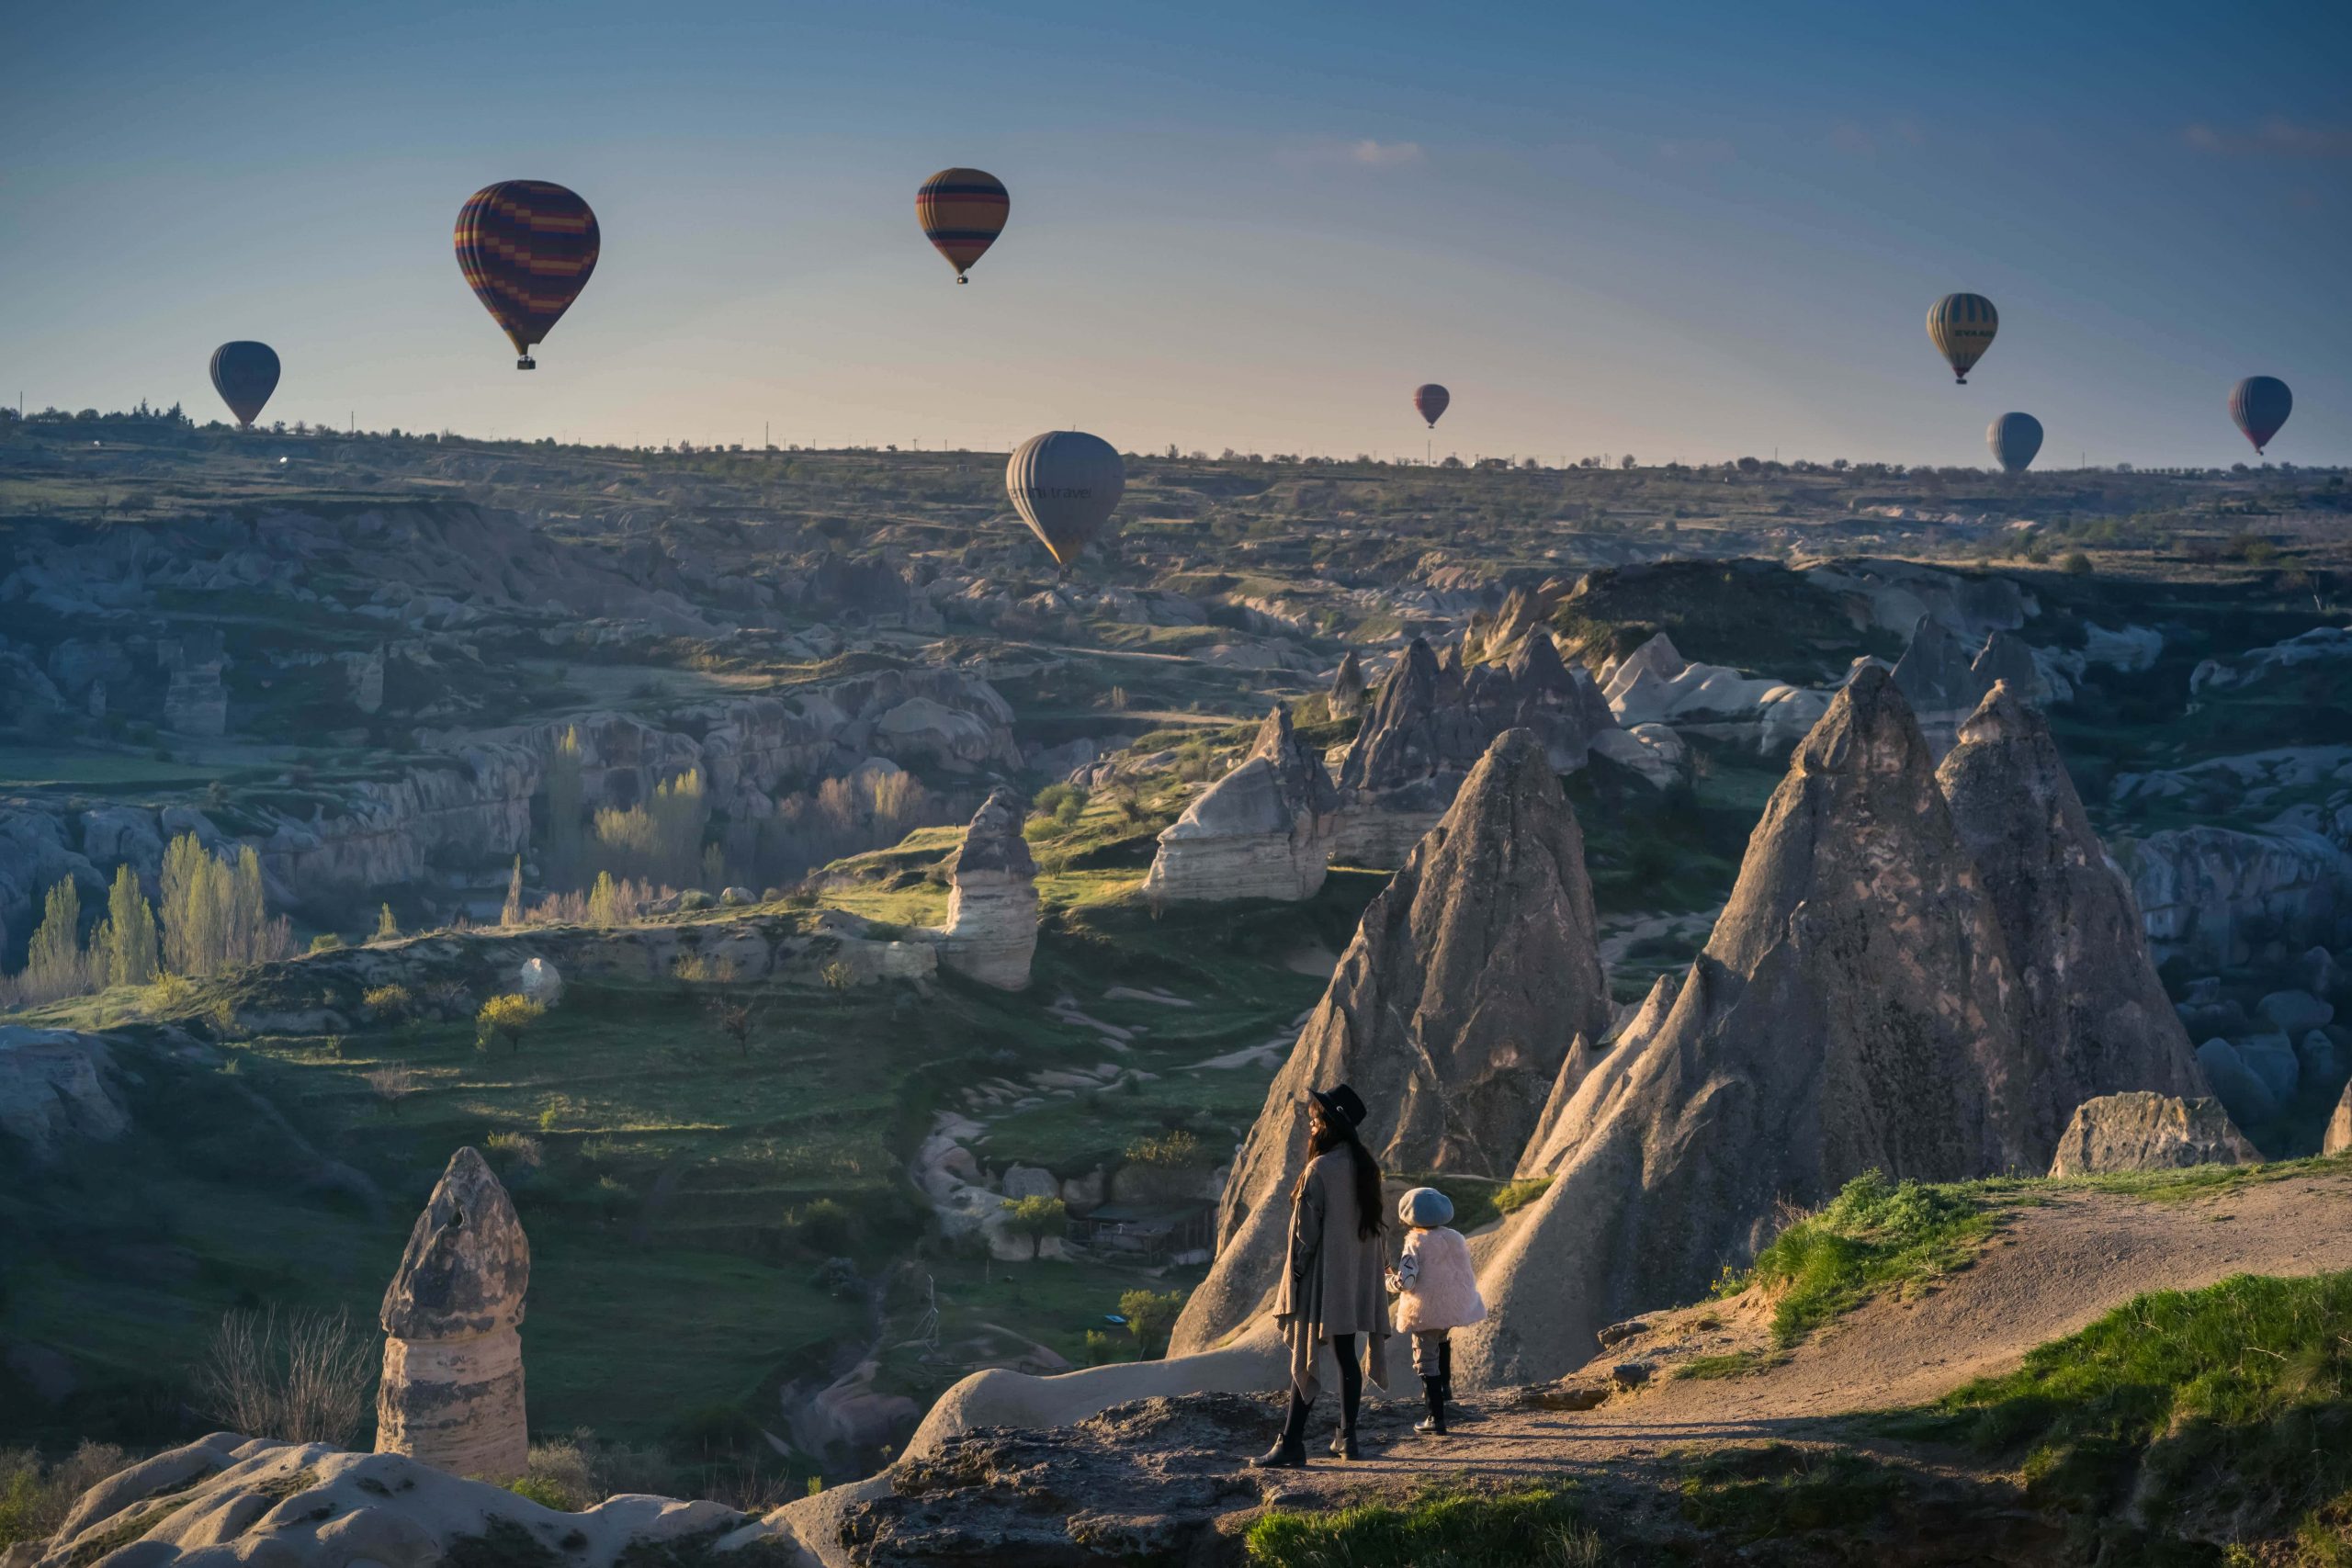 sunrise in Cappadocia, one of the magical places to visit in Turkey